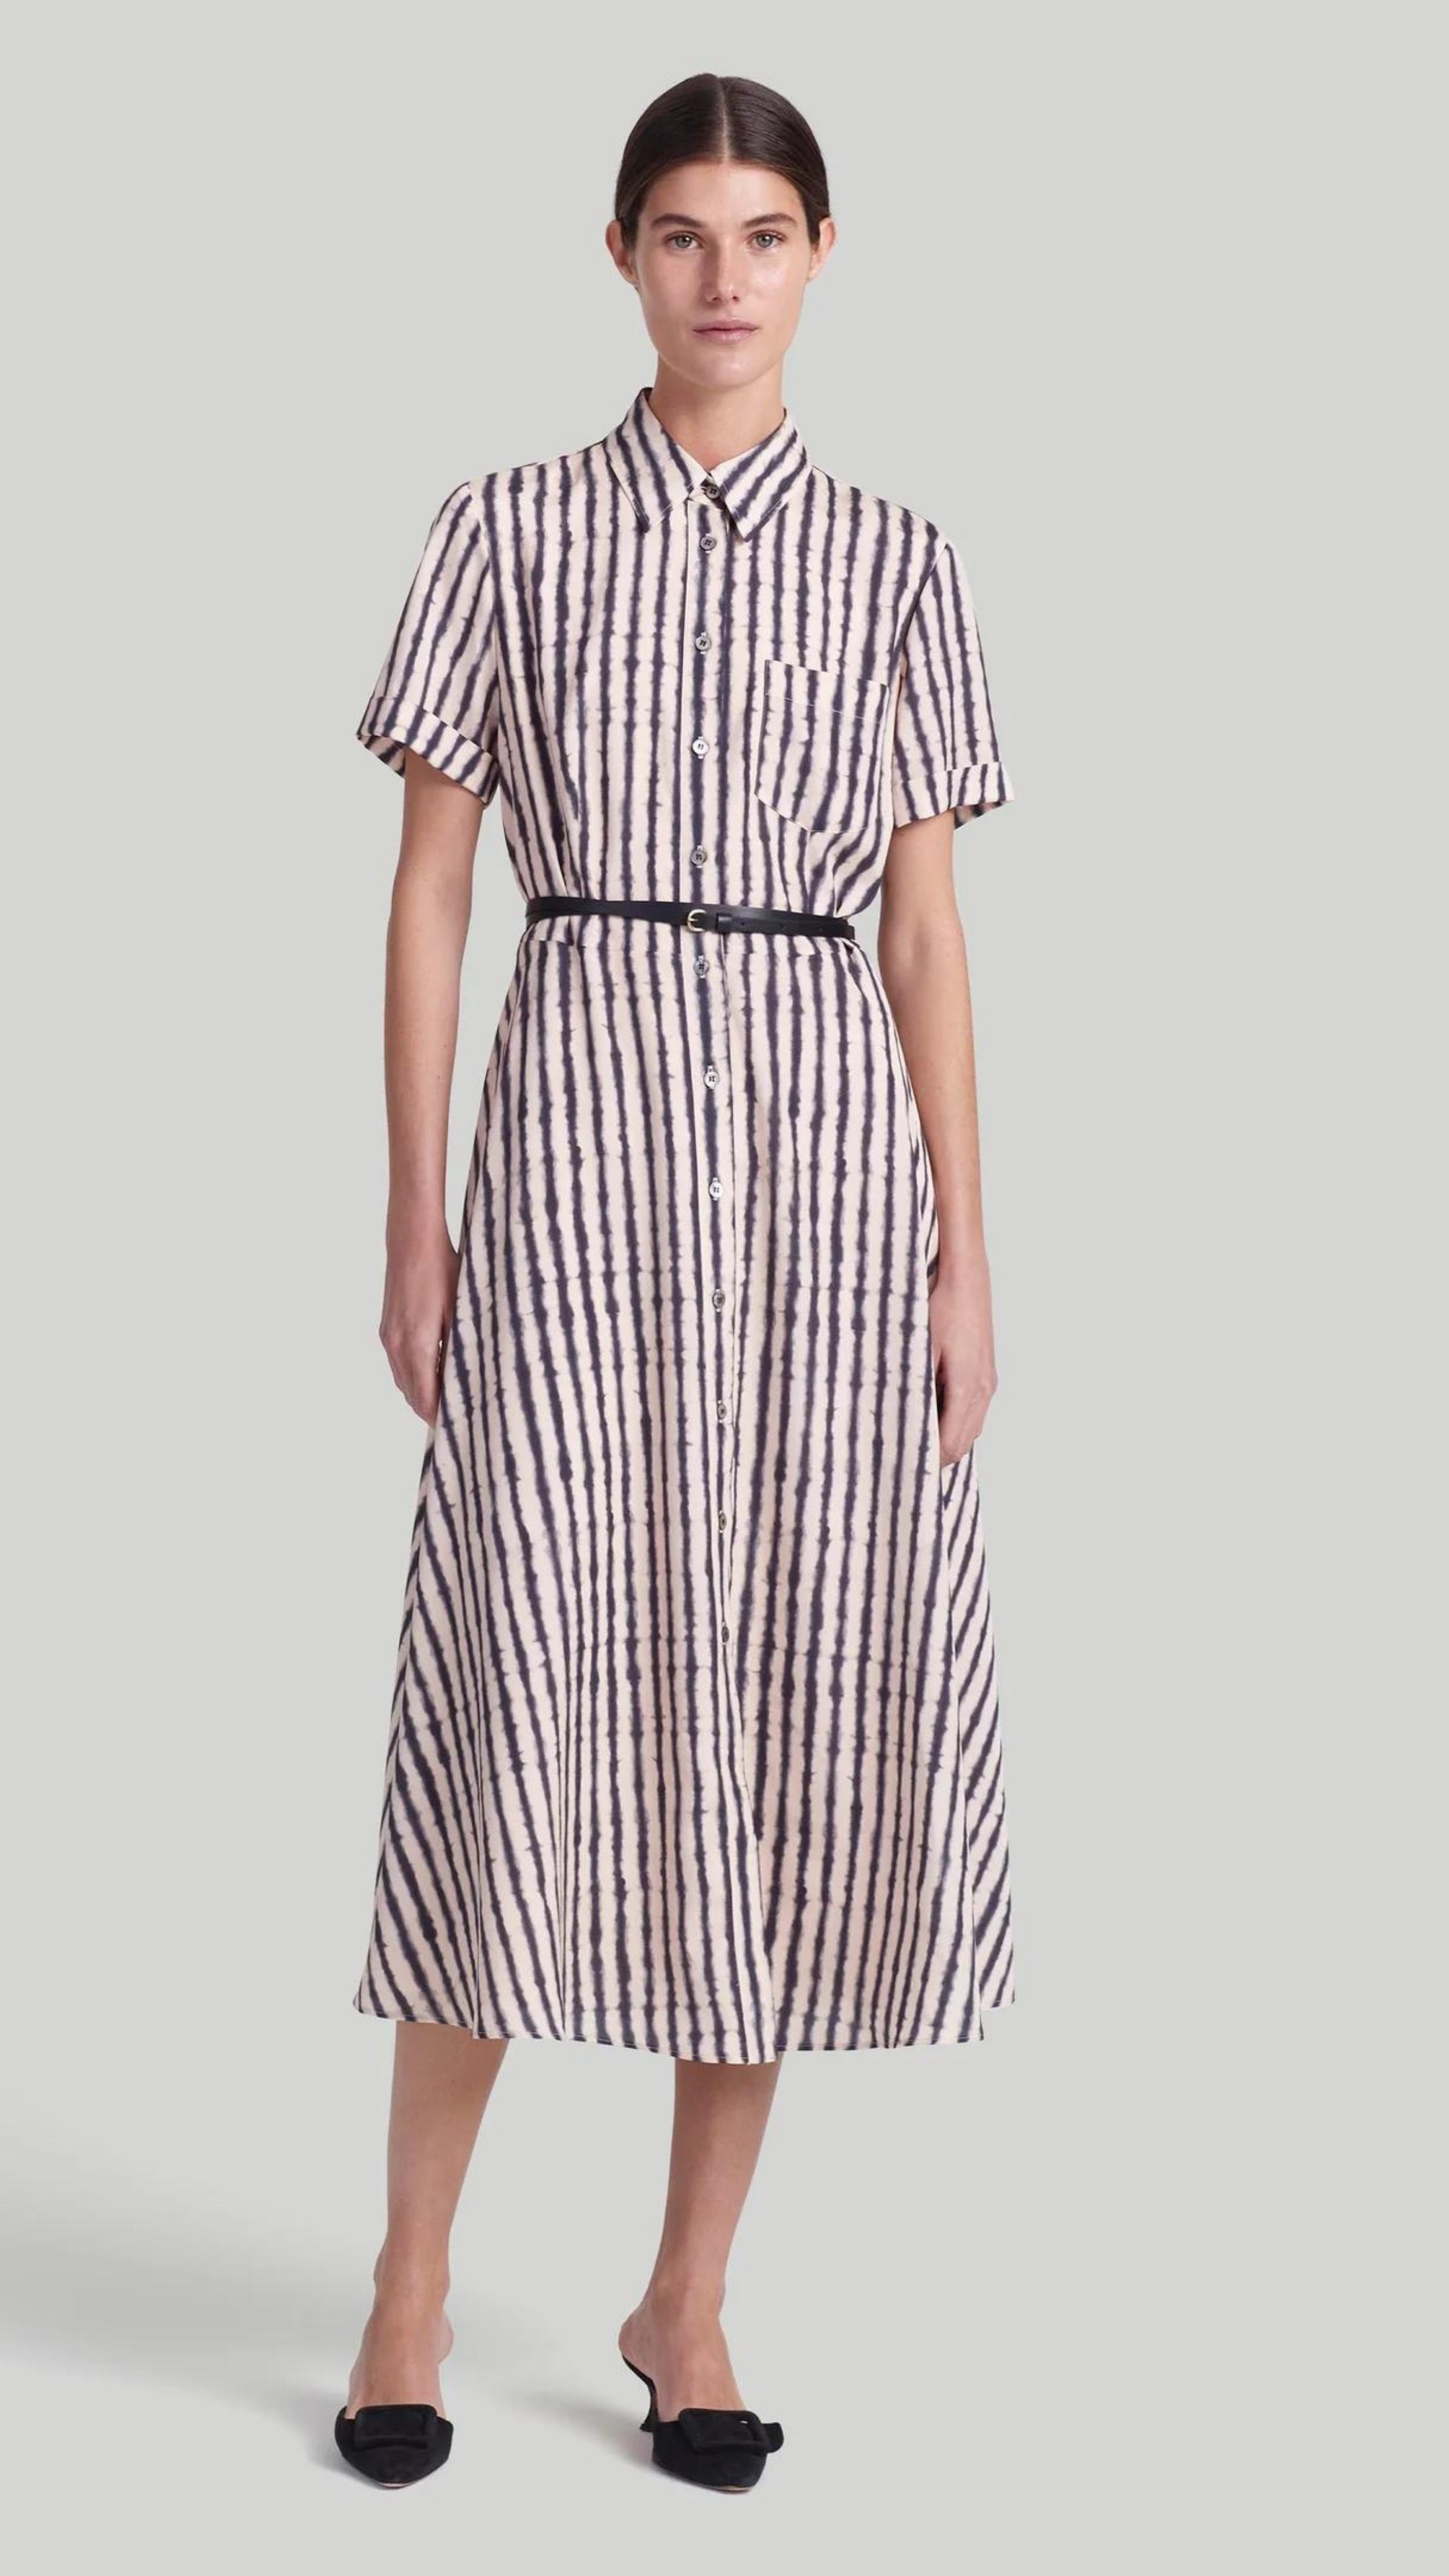 Altuzarra Kiera Dress The &#39;Kiera&#39; dress is designed with a small point collar, short sleeves and a flattering A-line skirt. It is detailed with a slim leather waist belt and features a black and white stripe pattern and a front breast pocket. Shown on model facing front.